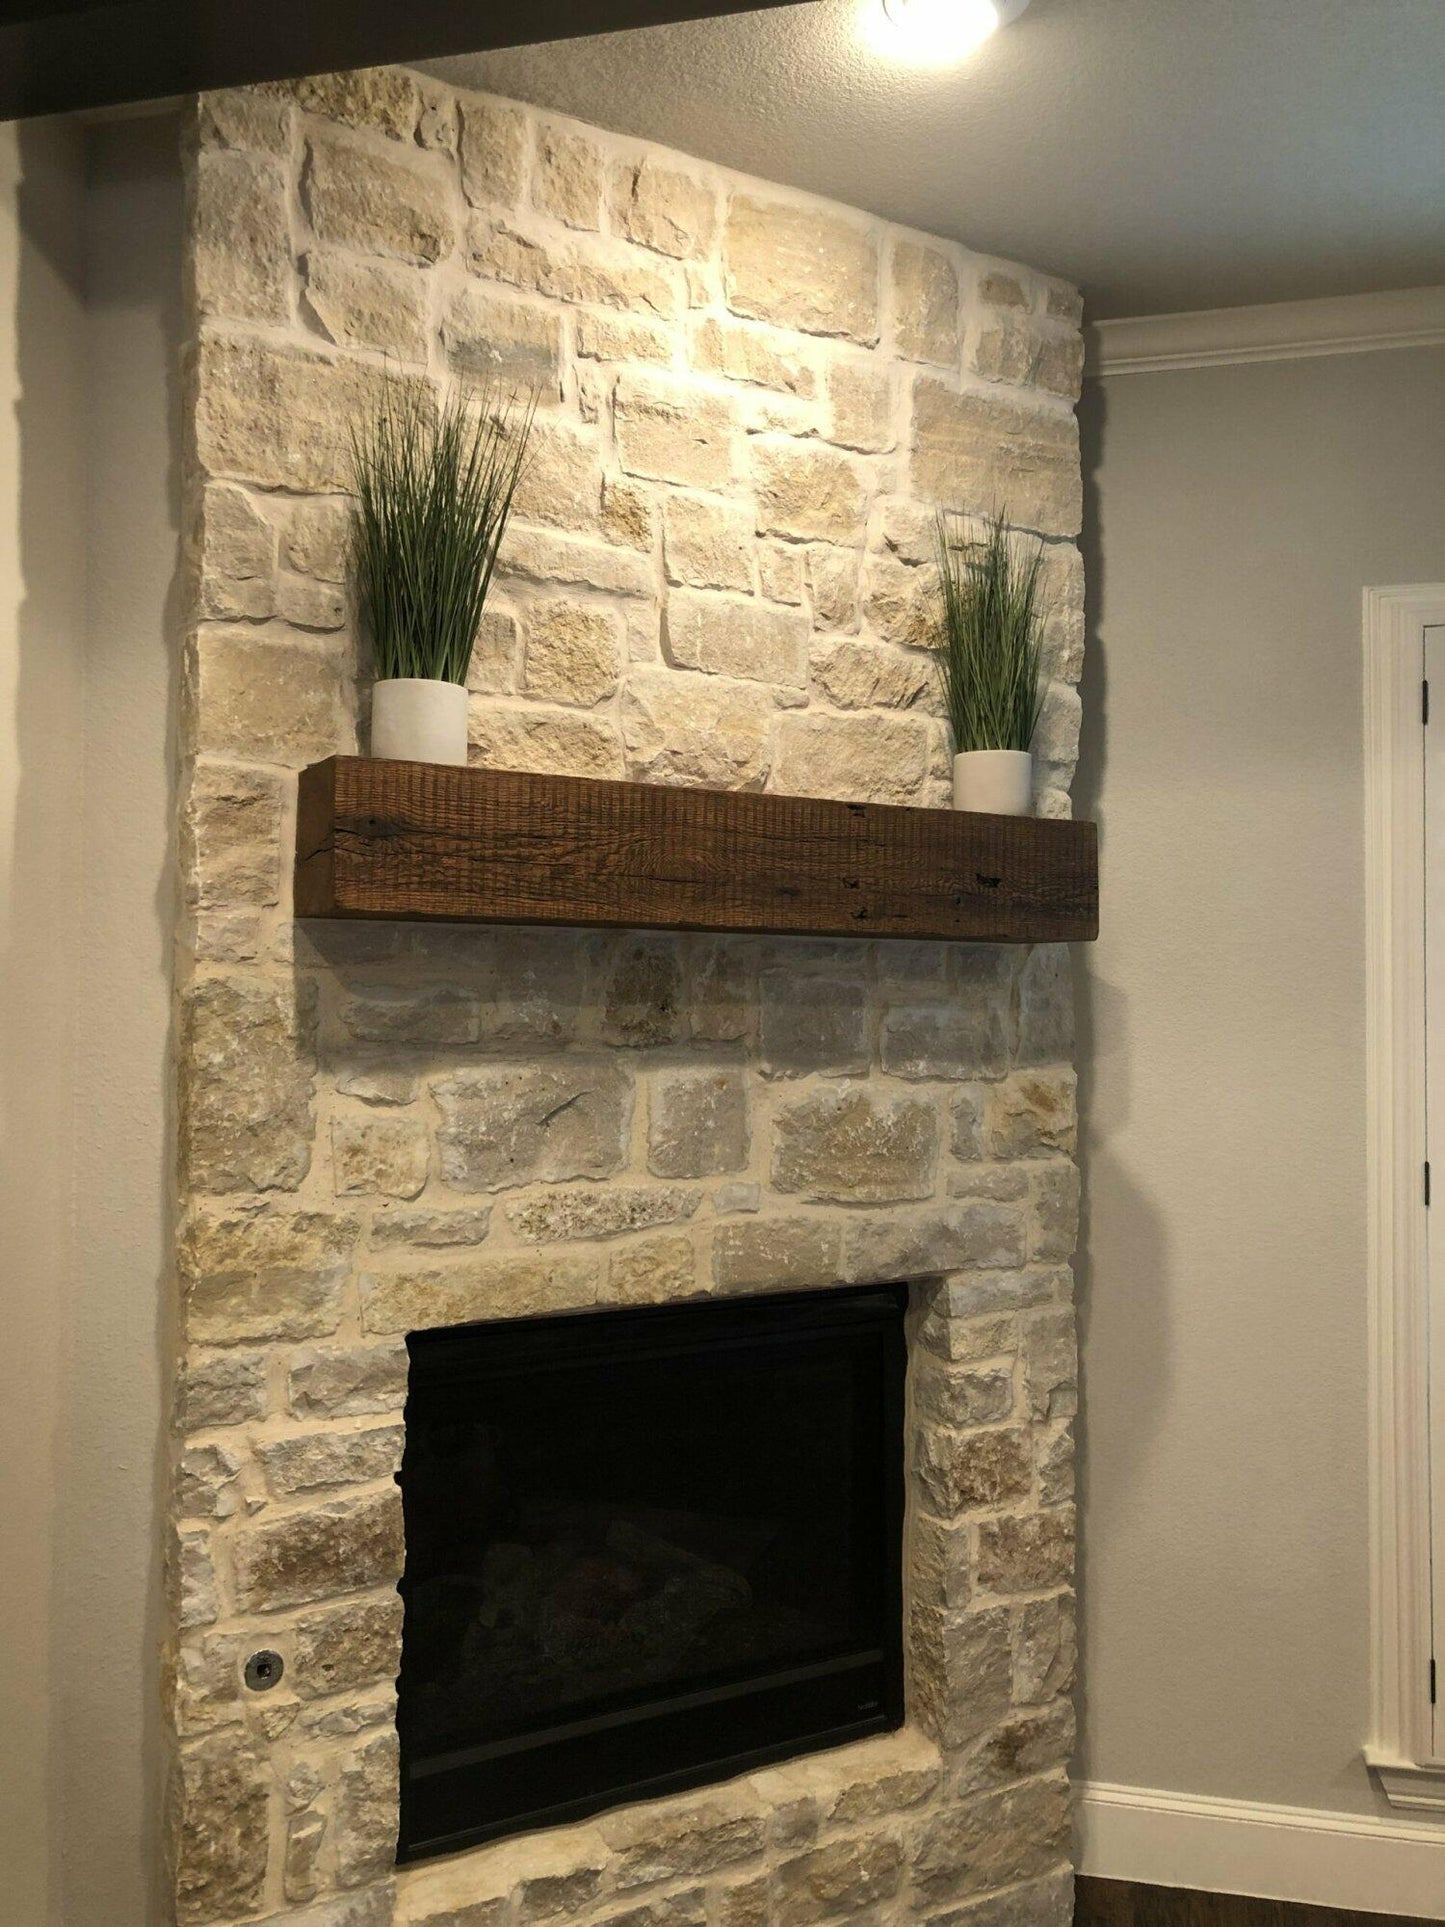 a reclaimed wood fireplace mantel on a stone fireplace. The mantel was stained to be dark and markings from a saw are prominent in the mantel.